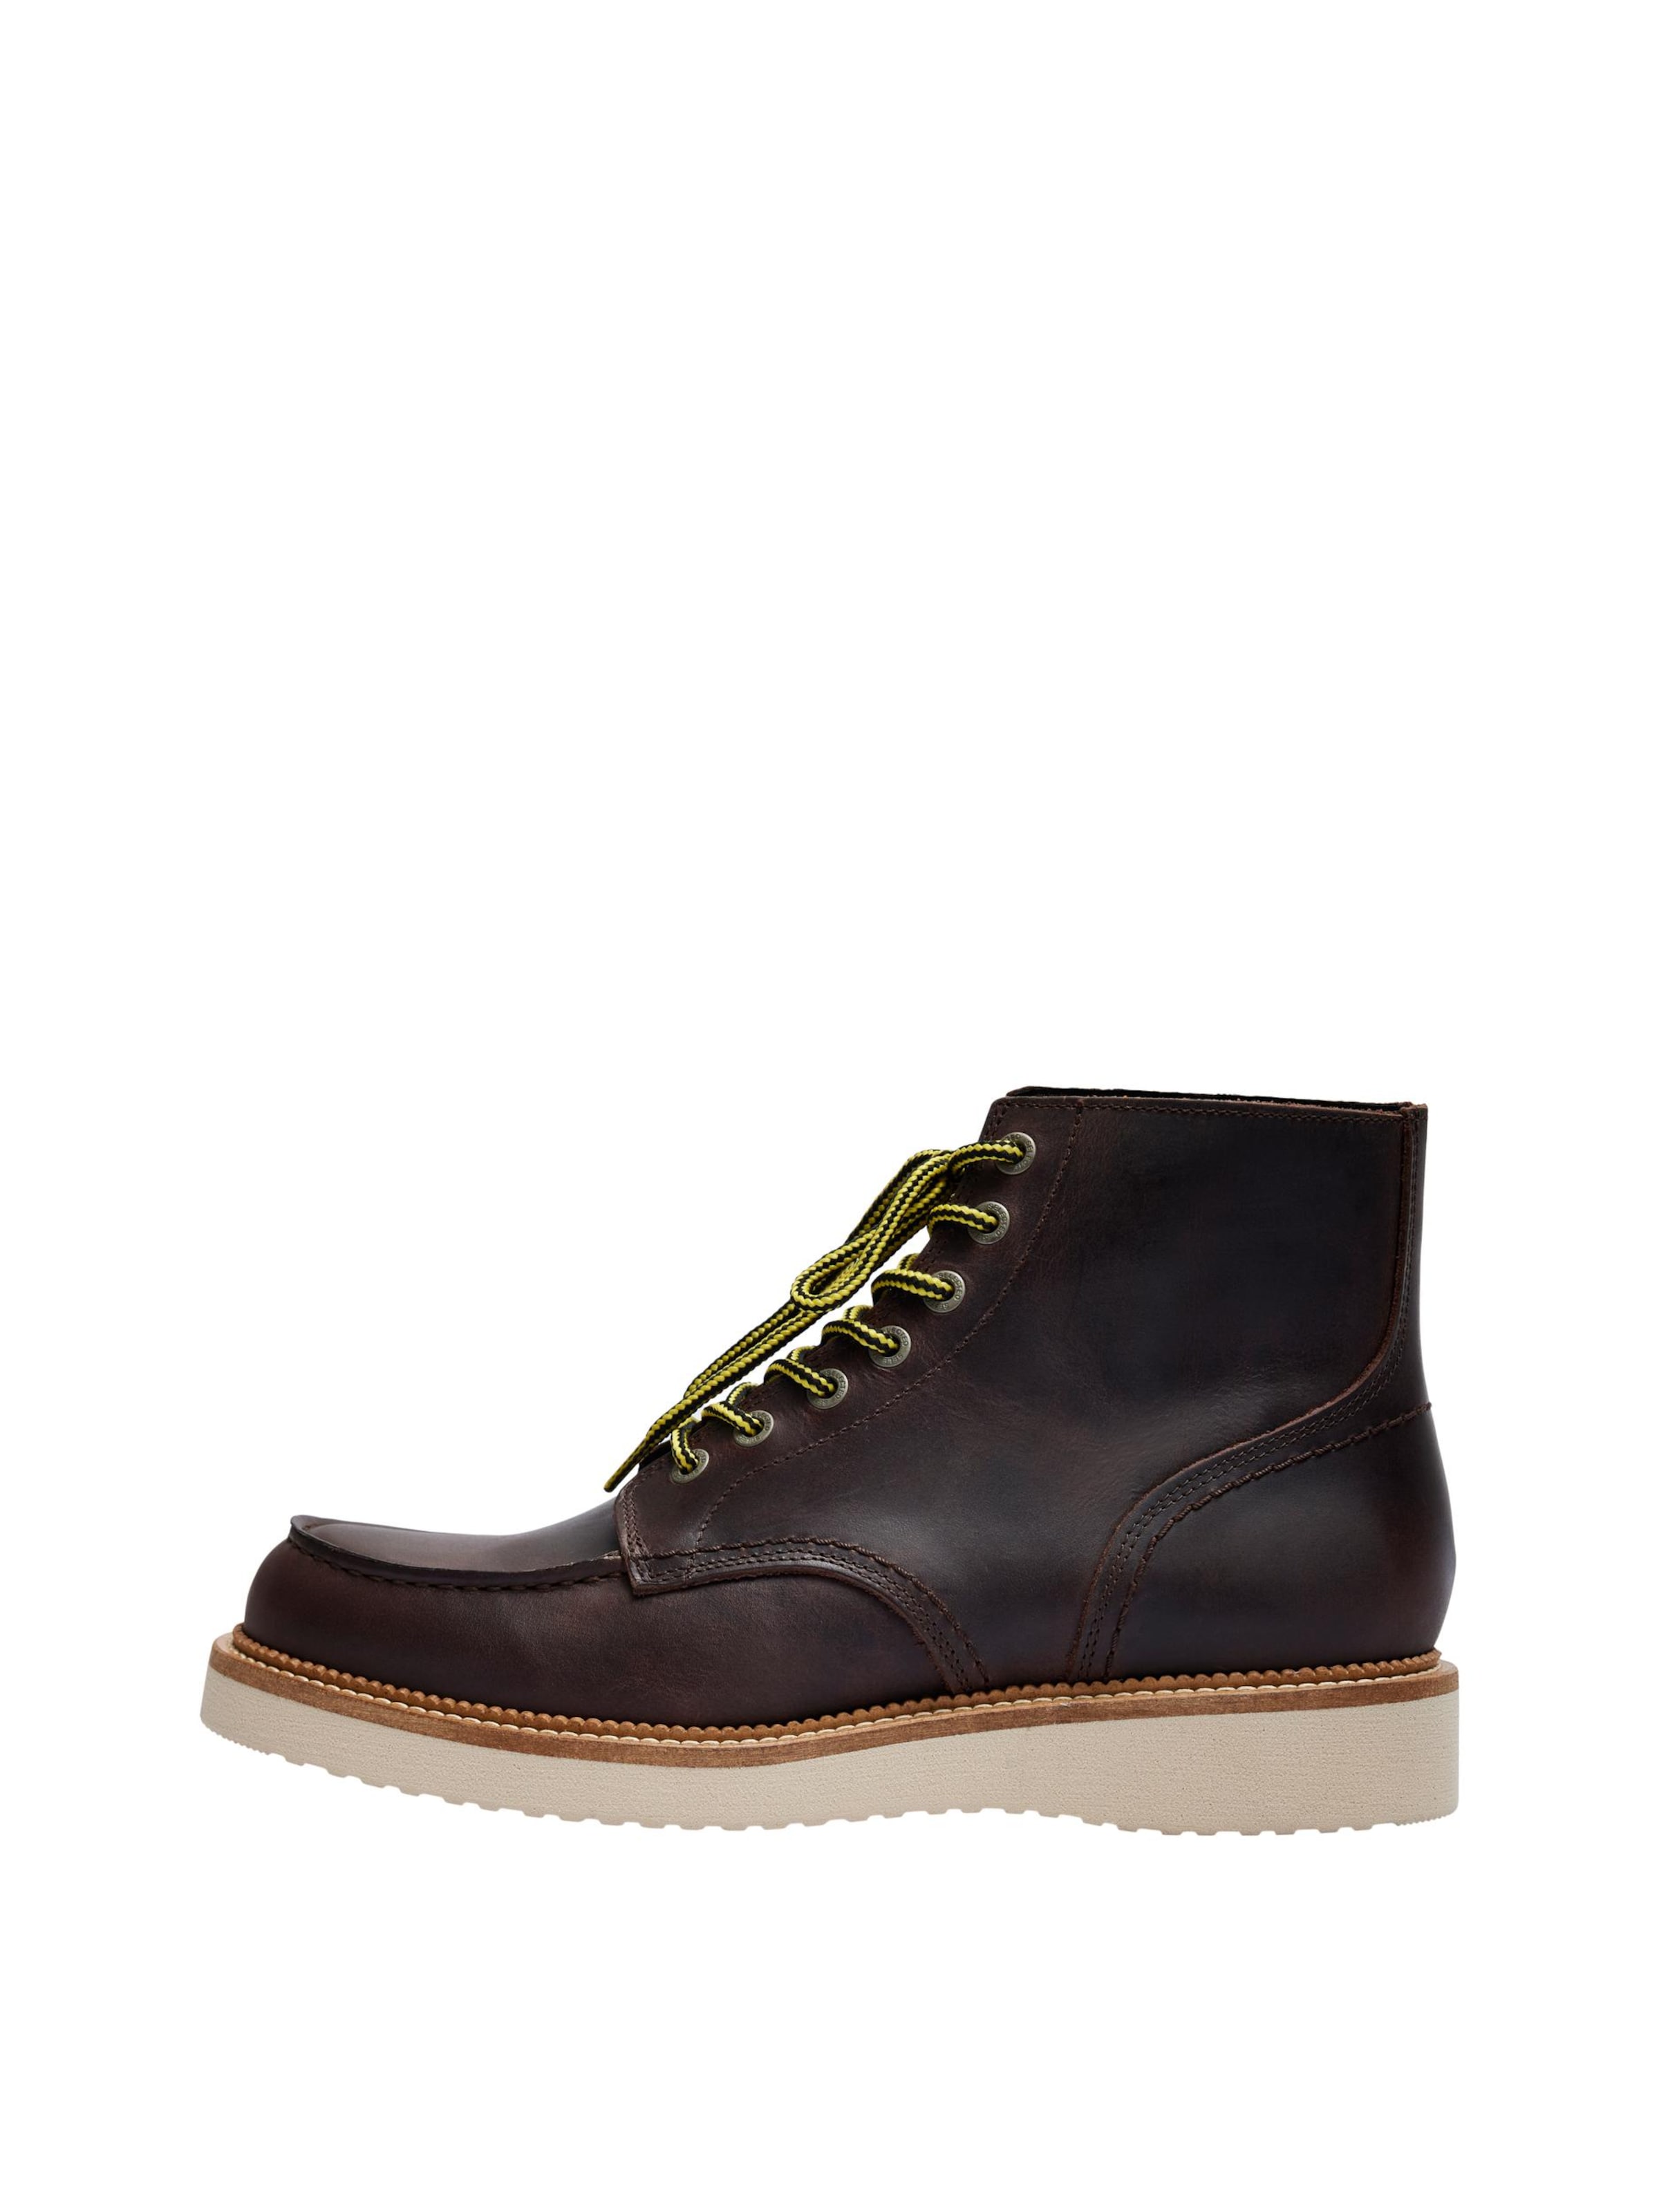 Selected Homme Schnürboots 'teo' 46 Braun